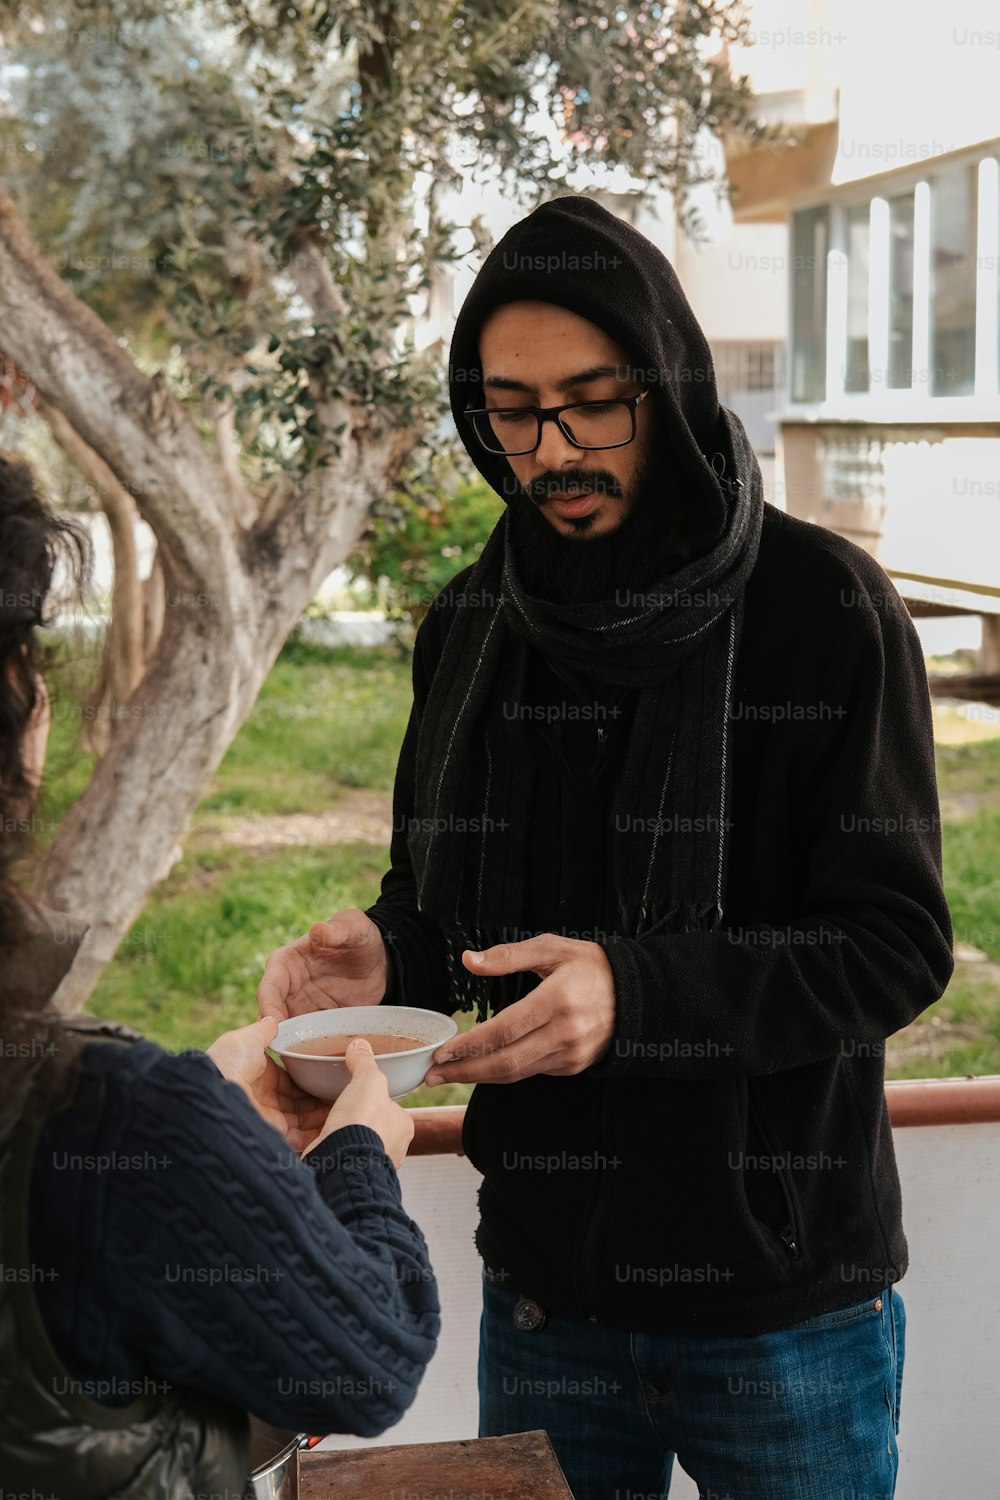 a man in a hoodie is handing a plate to a woman